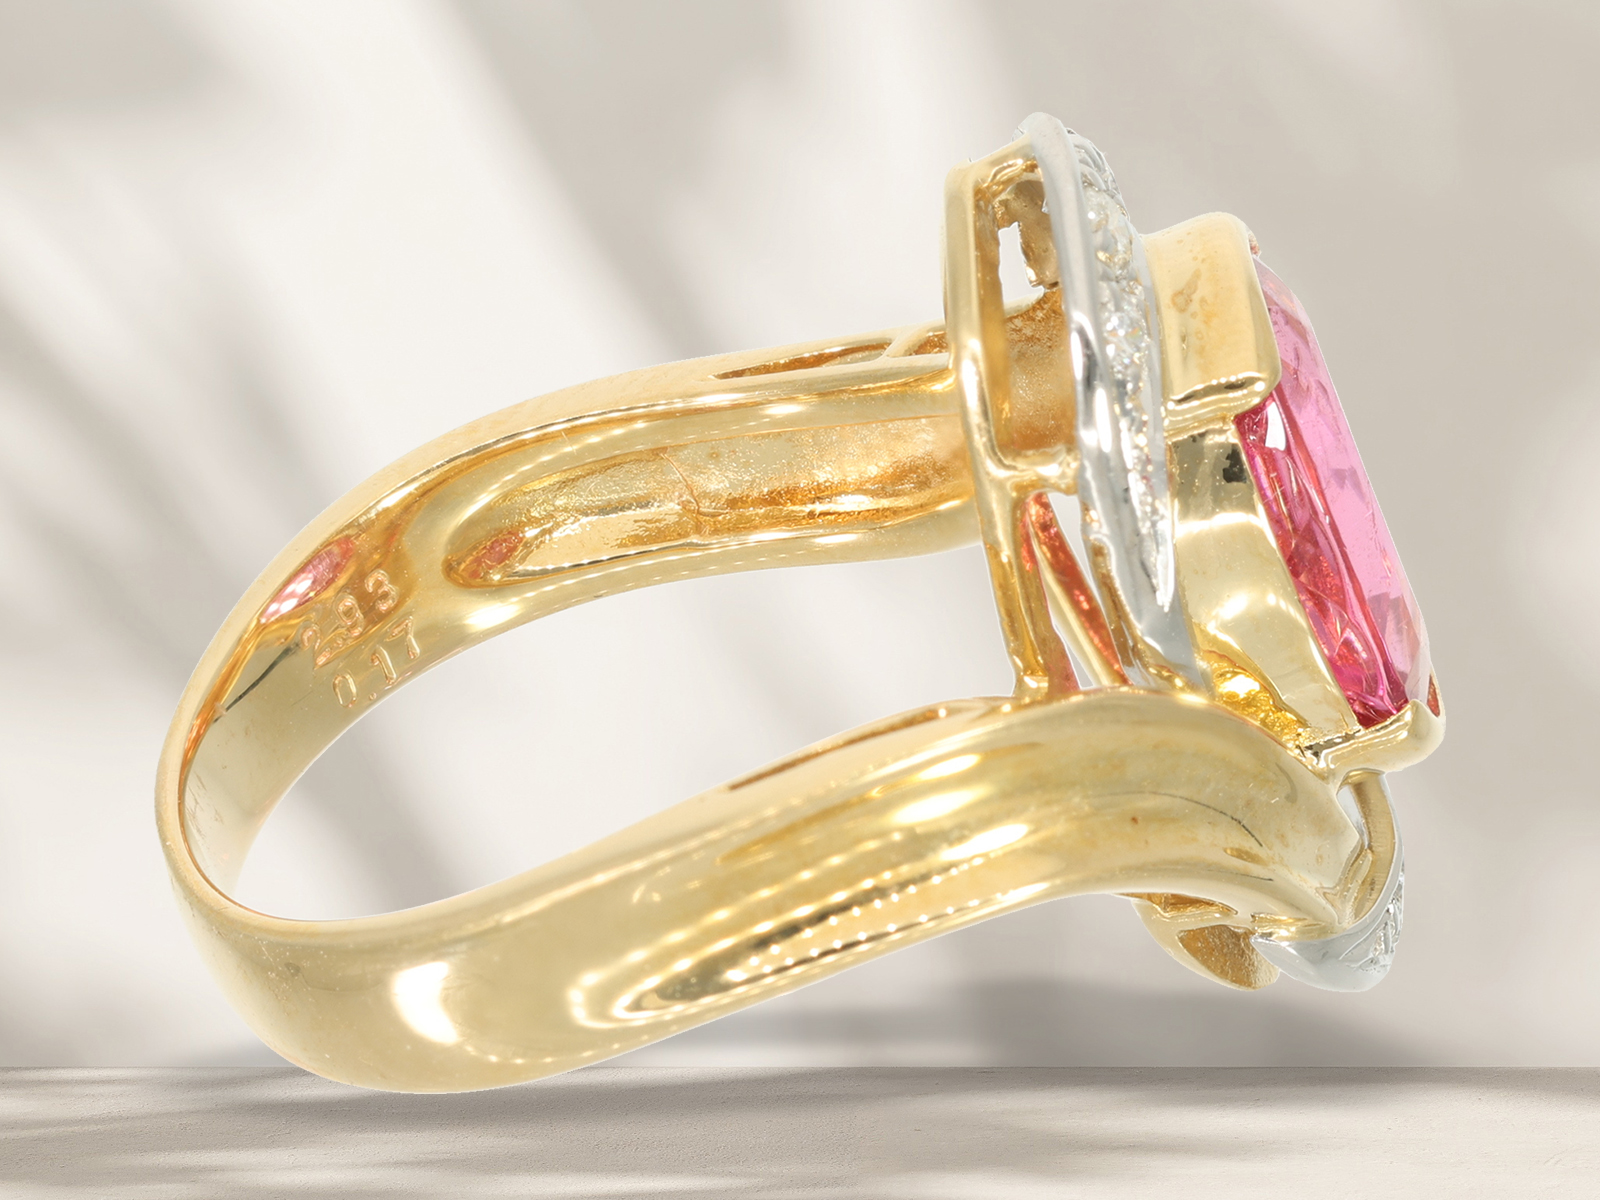 Ring: goldsmith ring with a rare "intense pink" tourmaline and brilliant-cut diamonds - Image 5 of 5